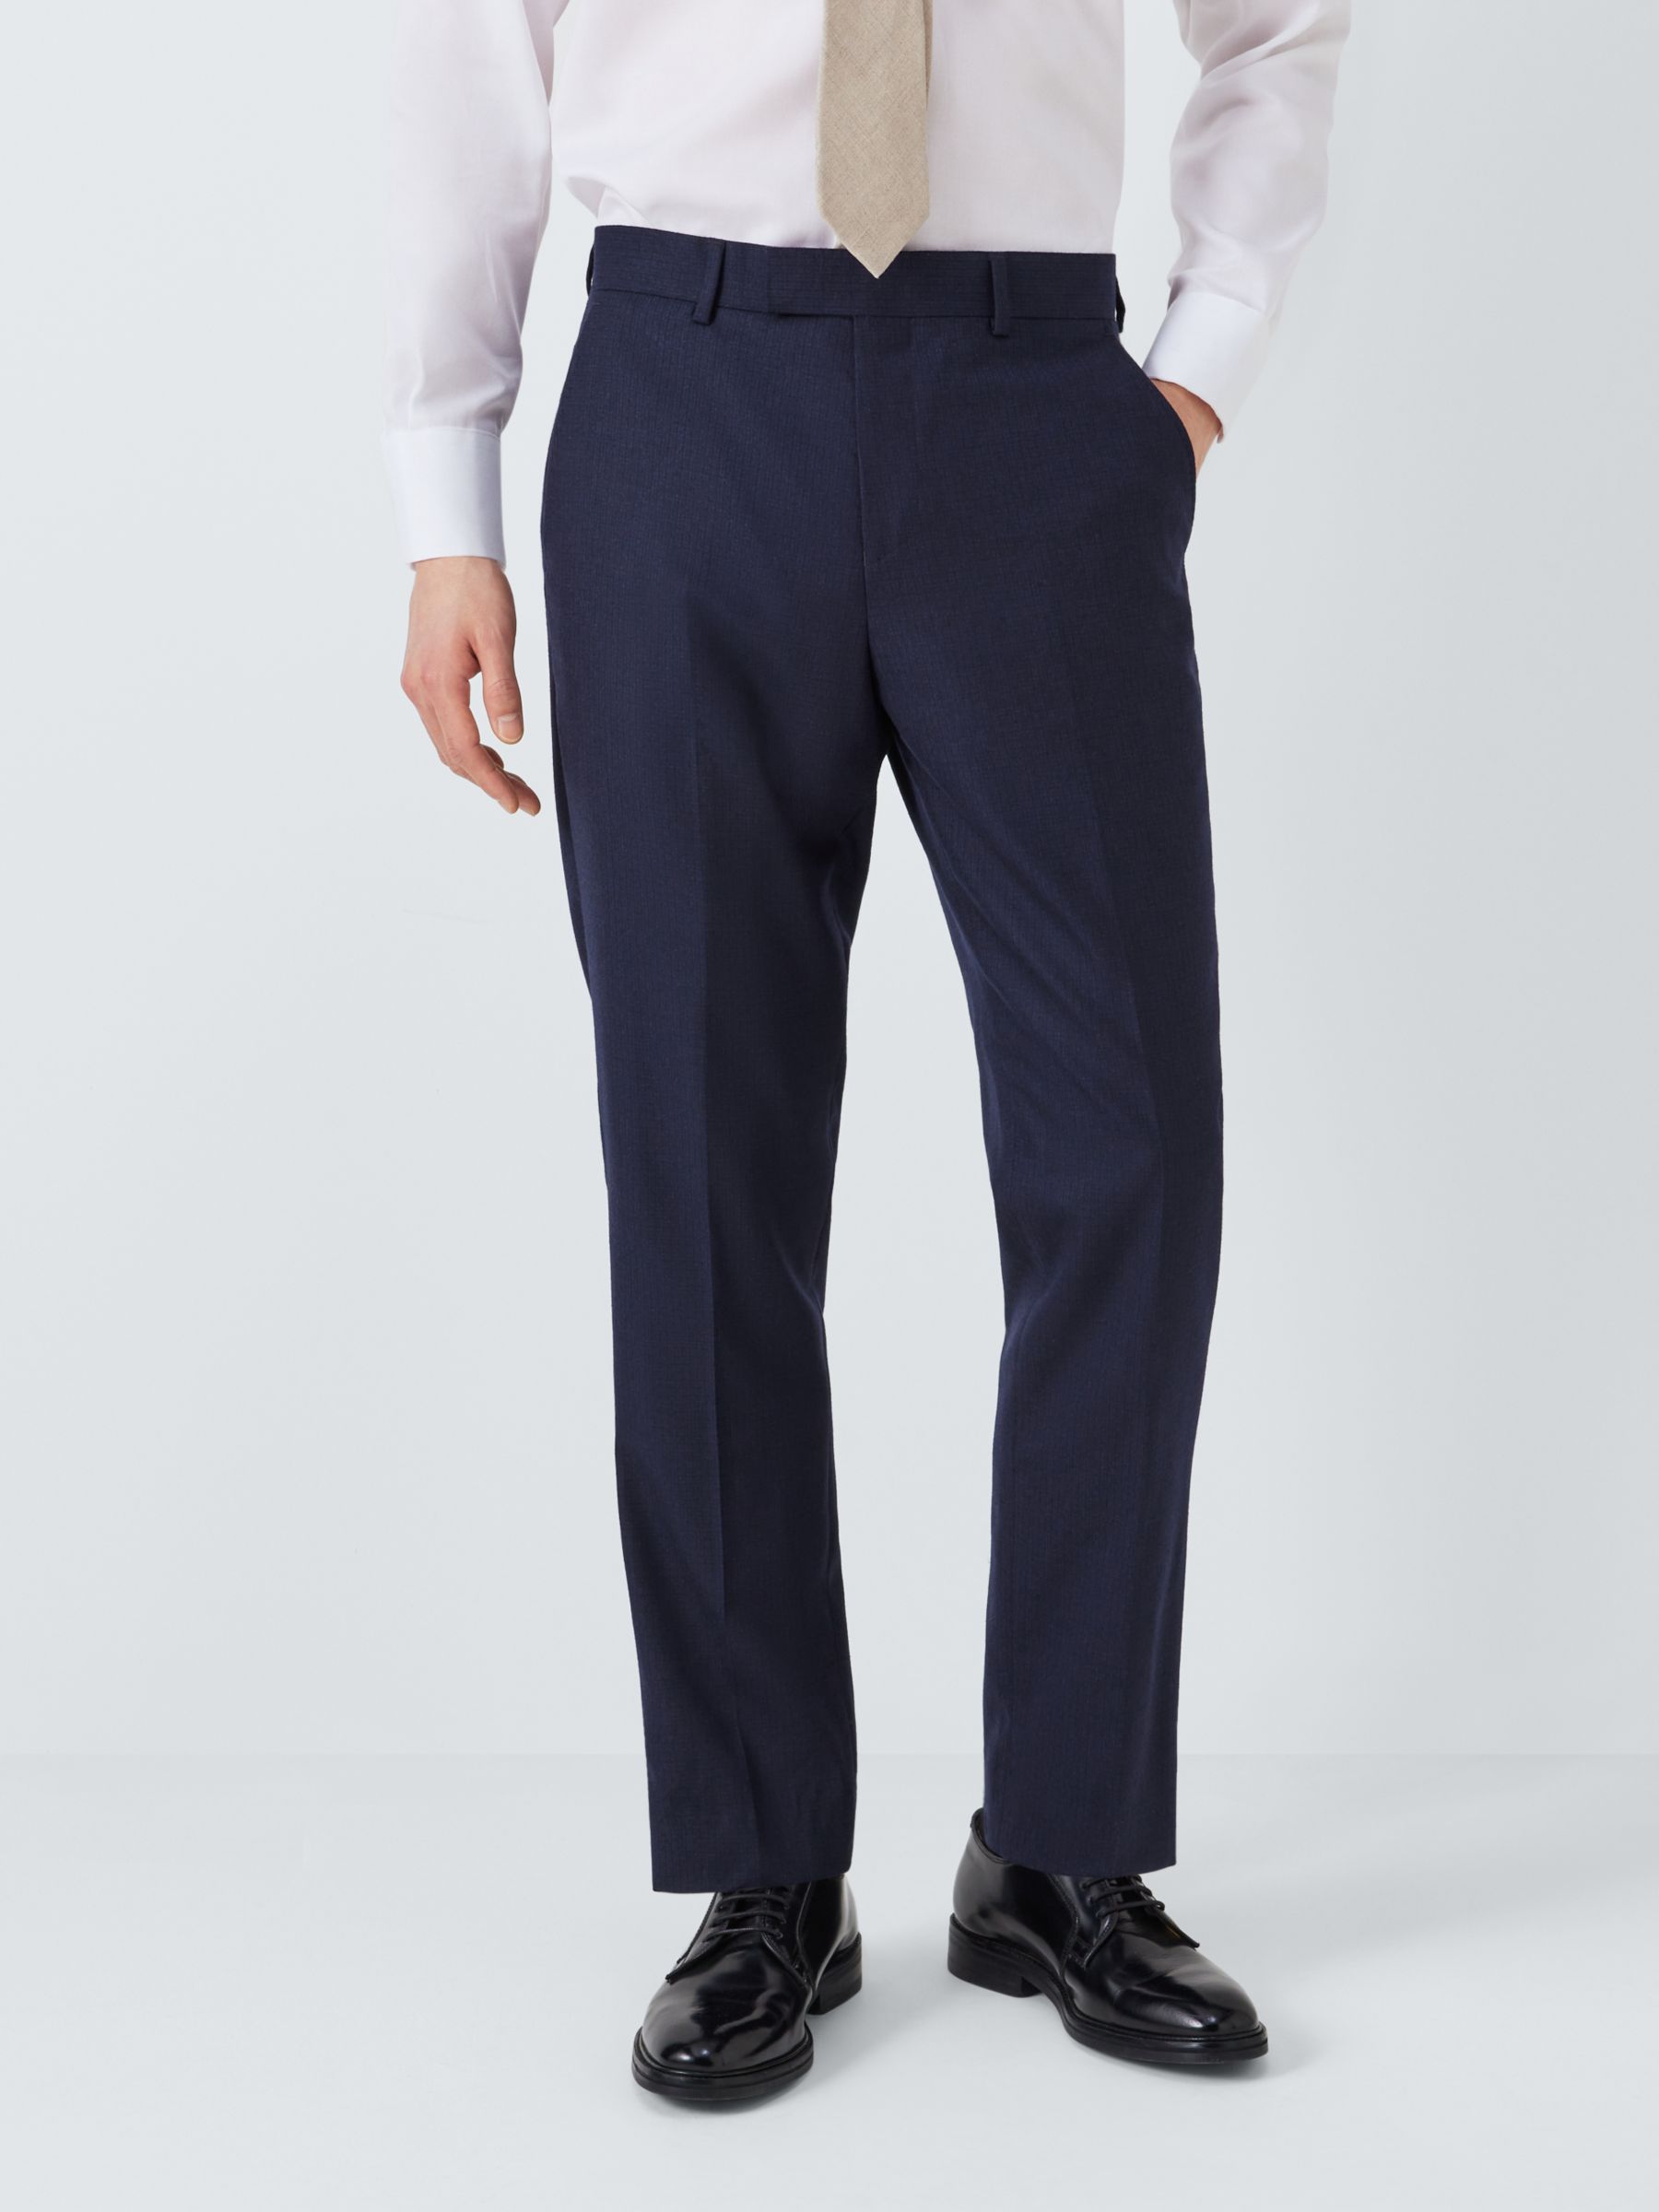 John Lewis Zegna Recycled Wool Regular Fit Suit Trousers, Navy, 32R